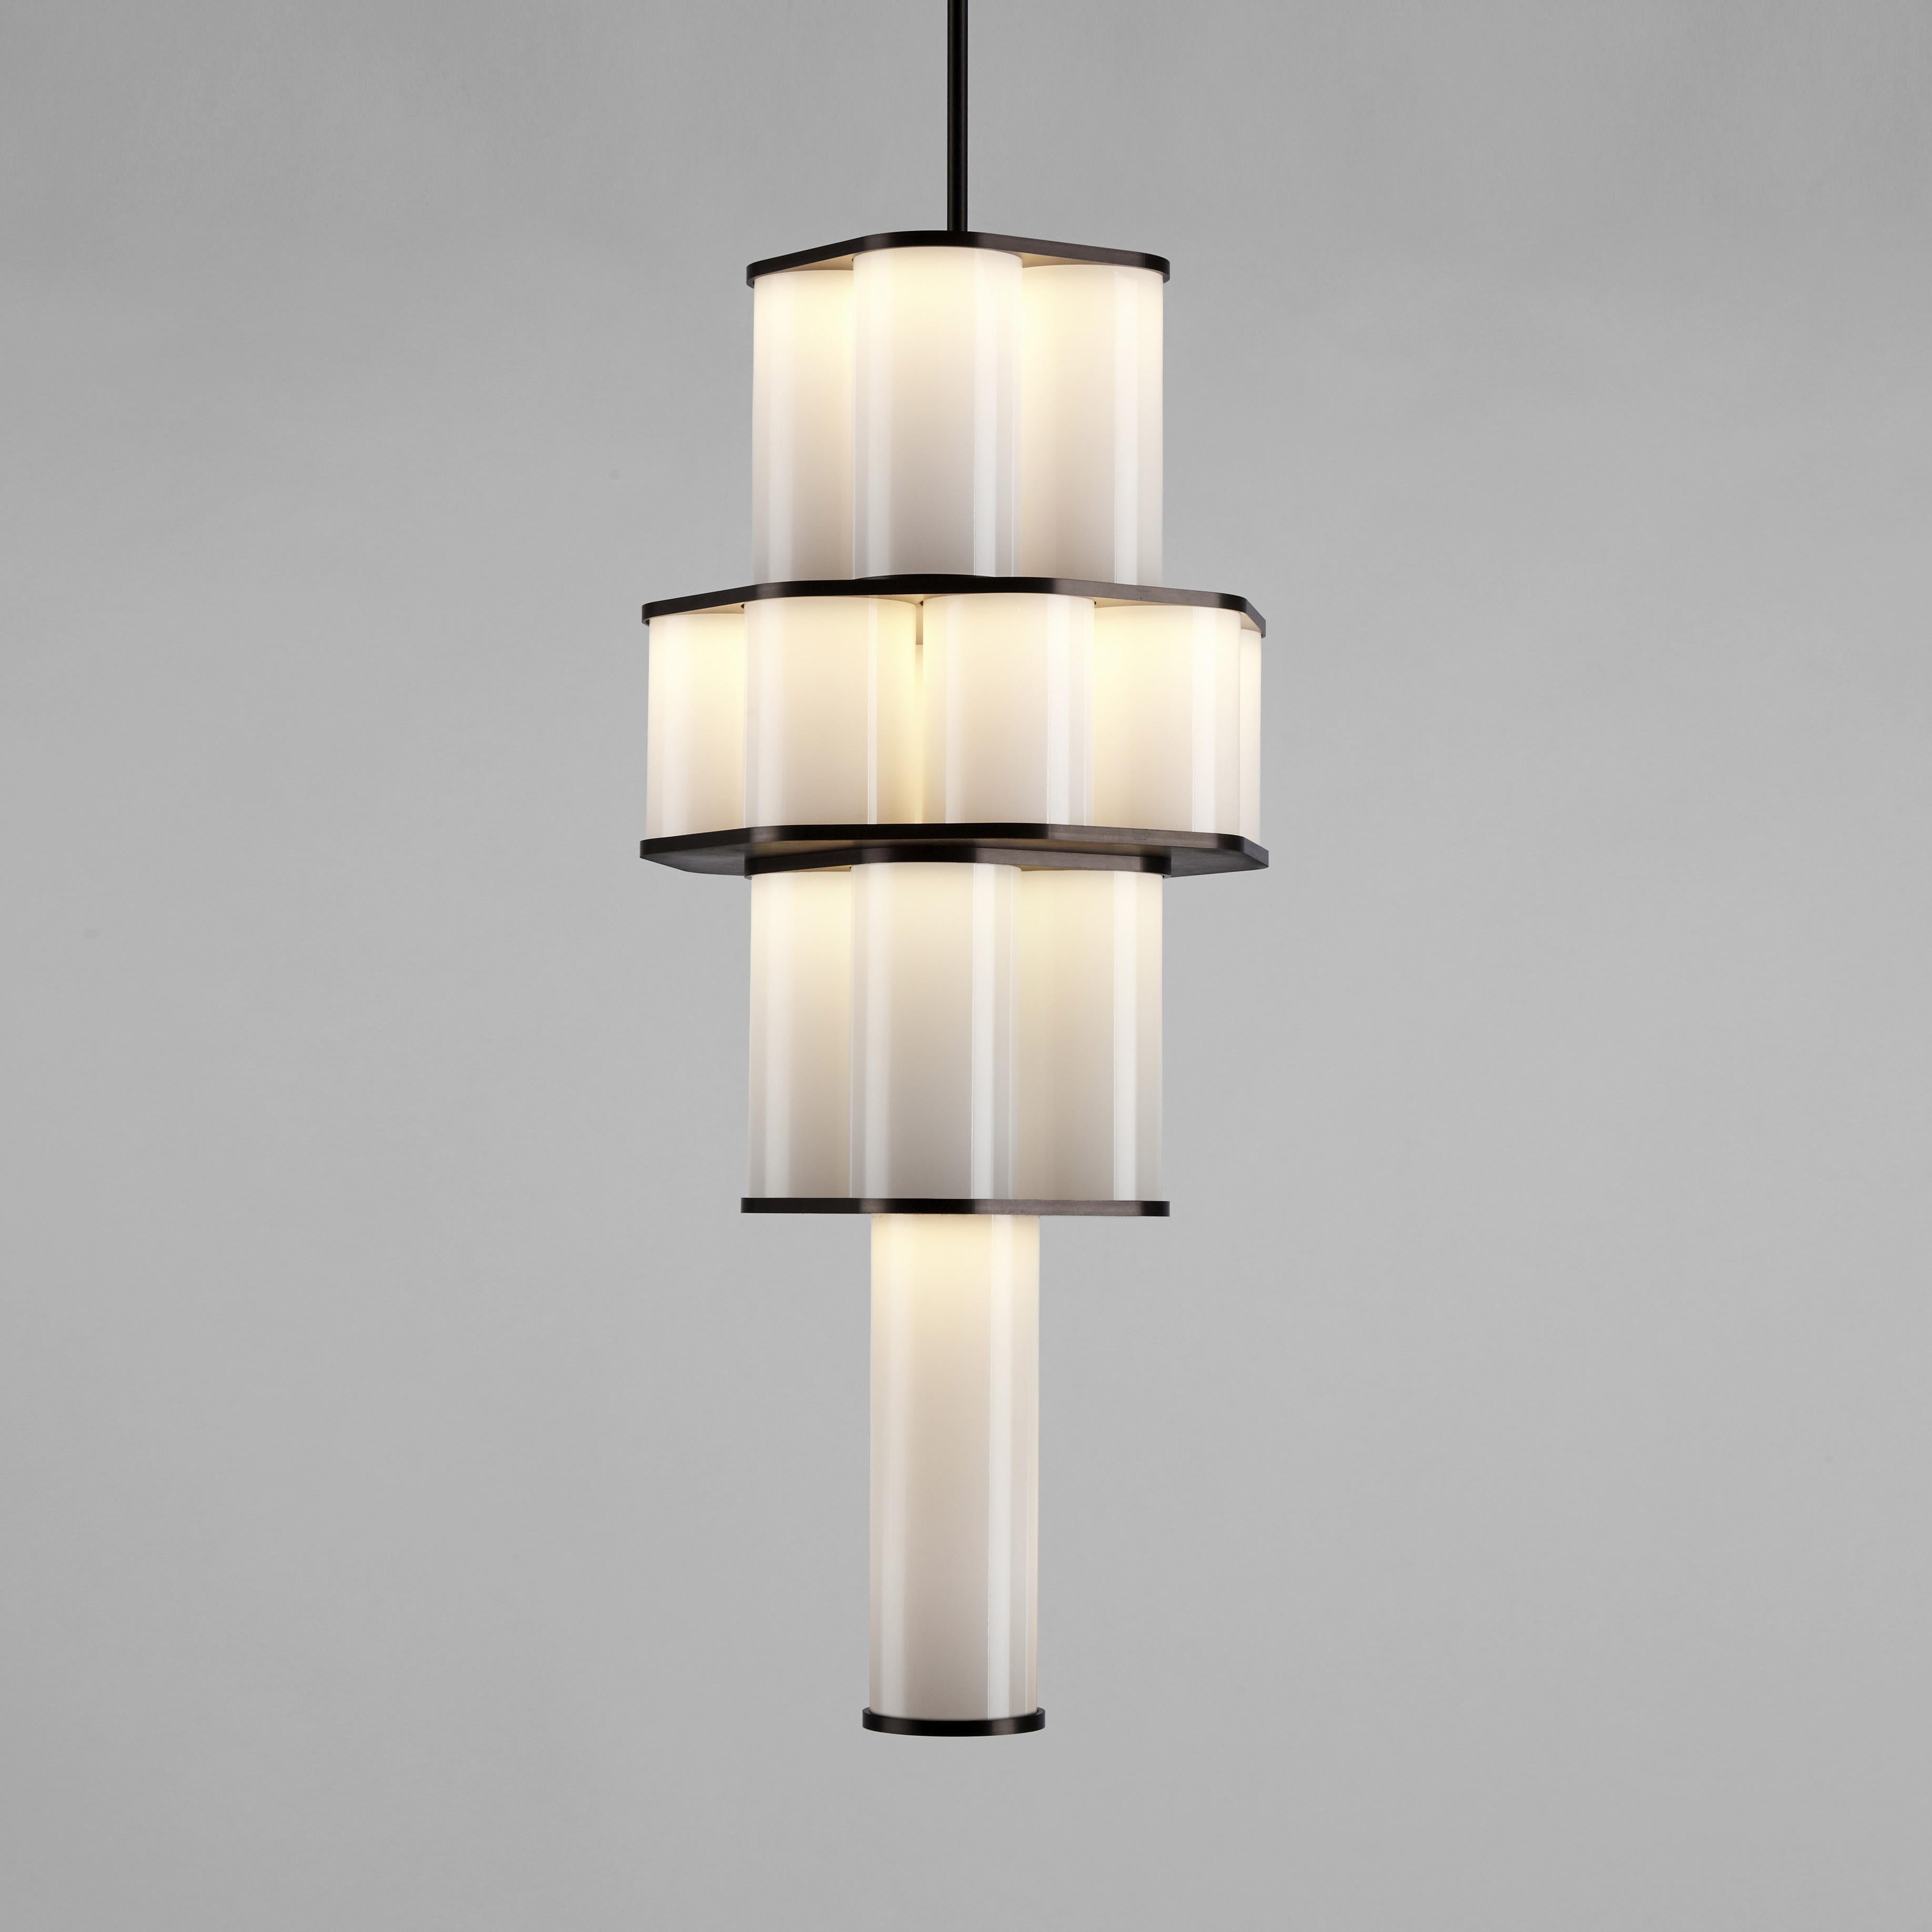 Jason Miller’s Bauer is a pendant fixture made of stacked, concentric clusters of handblown tubular glass. The glass fades from dark to light, recalling the tonalities of earth-to-sky views, producing an ethereal, atmospheric effect.

Please note